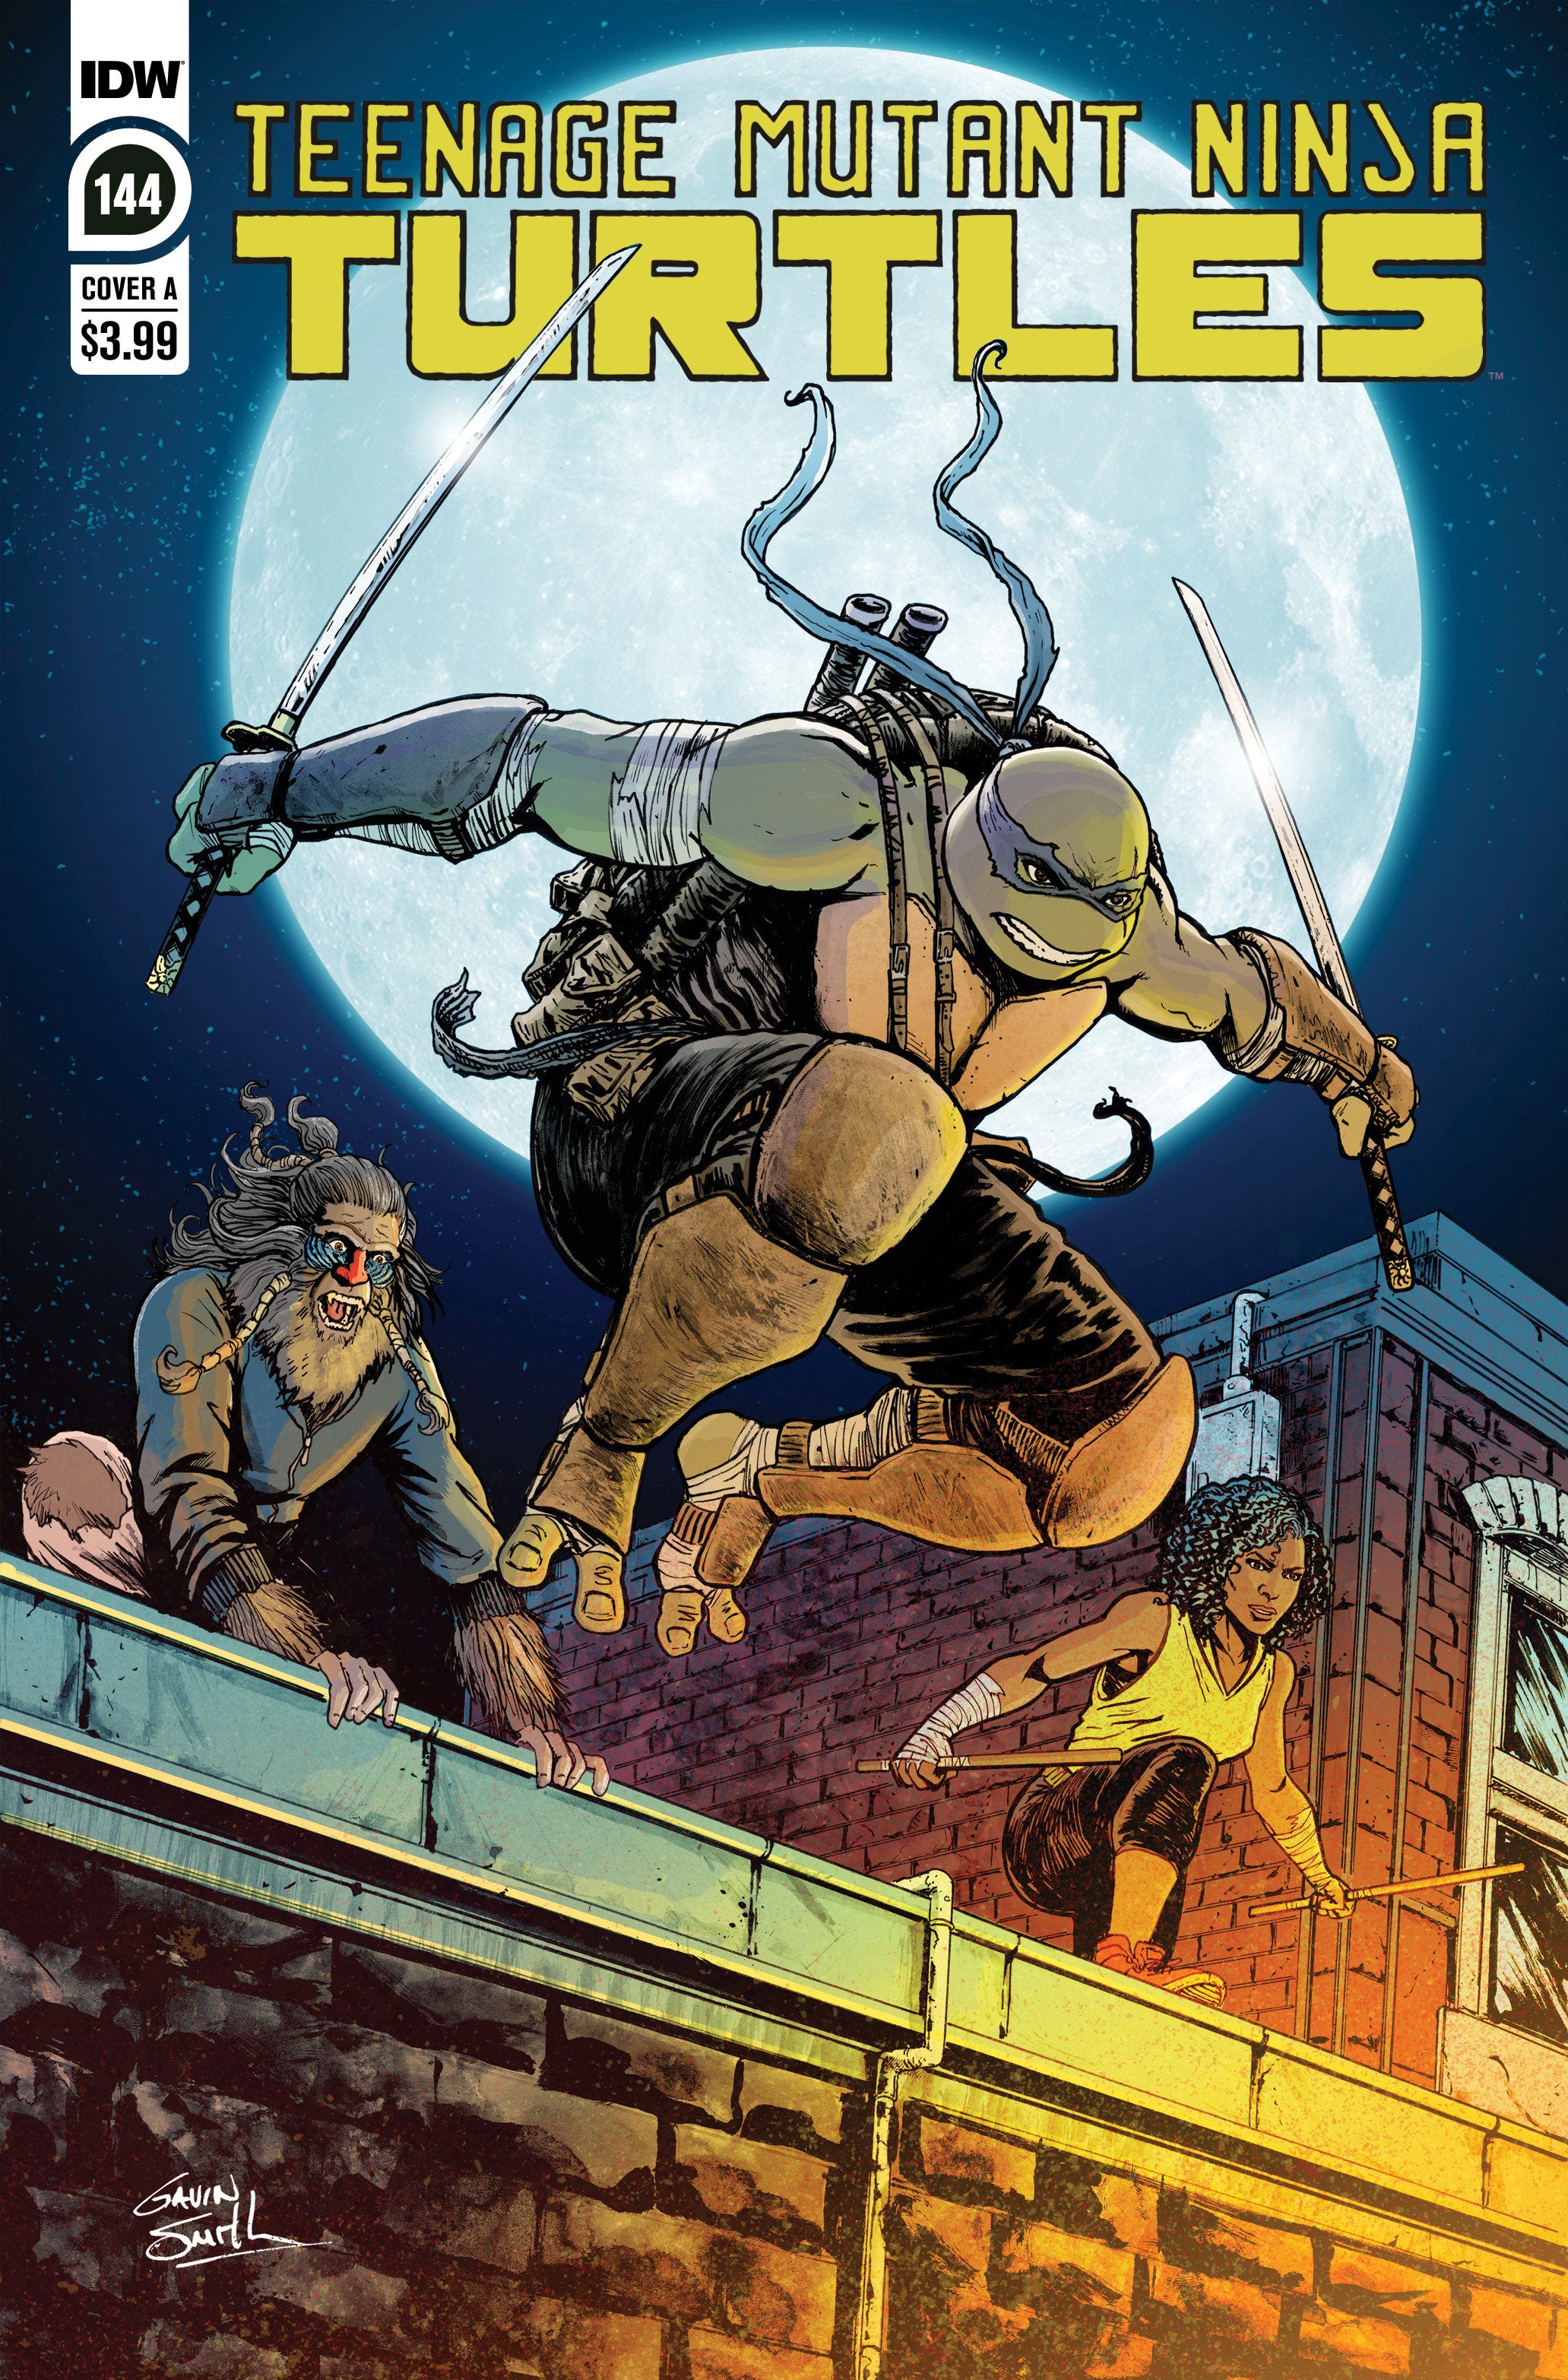 Teenage Mutant Ninja Turtles #144 Cover A (Smith) | Game Master's Emporium (The New GME)